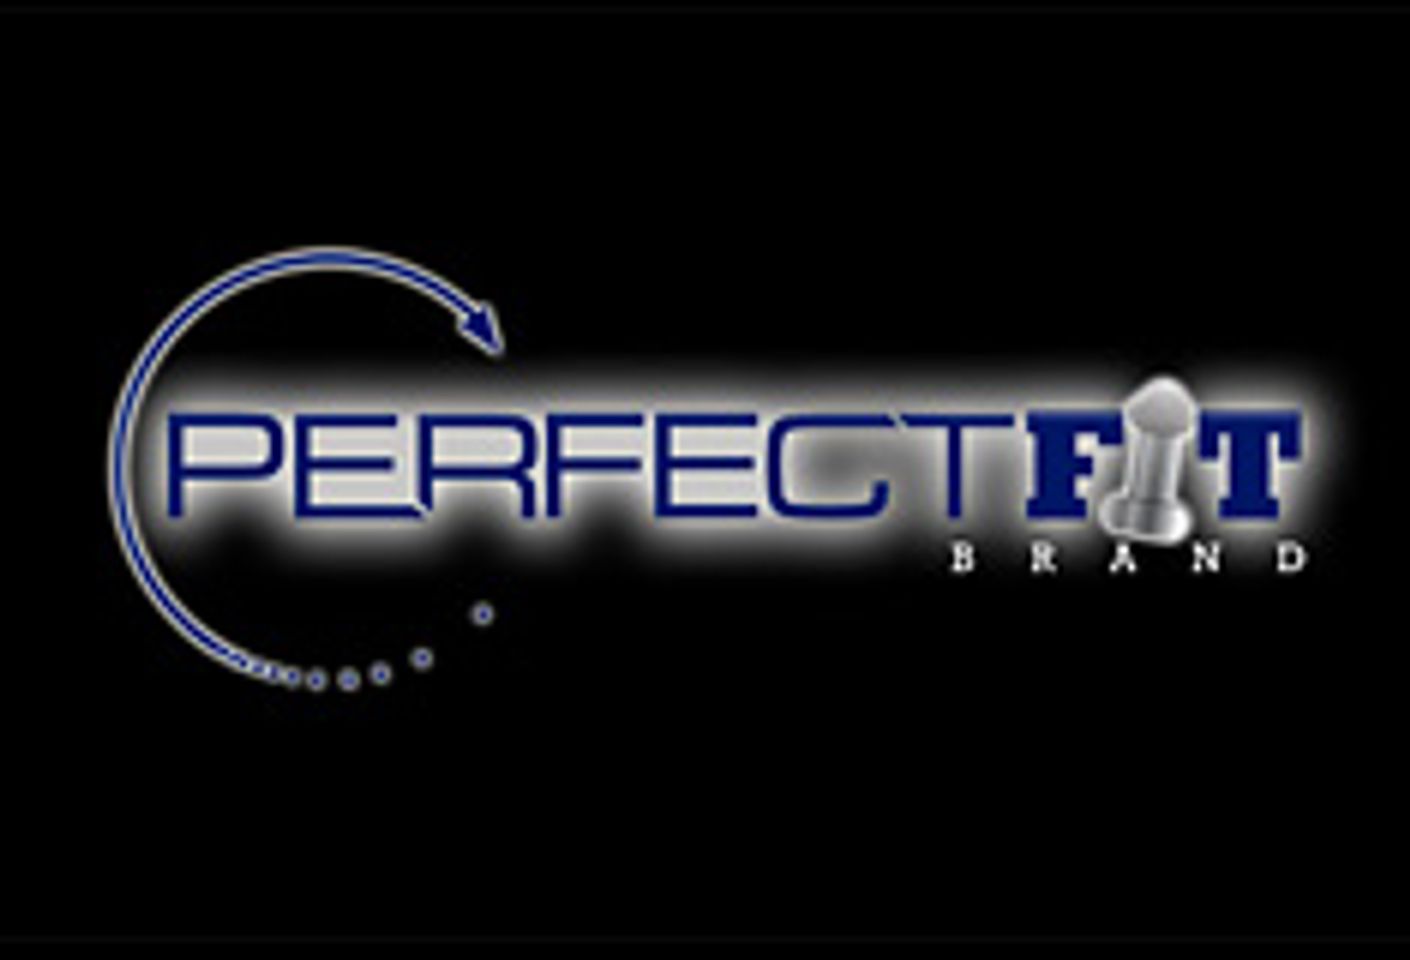 Perfect Fit Earns 3 Noms from AVN Awards